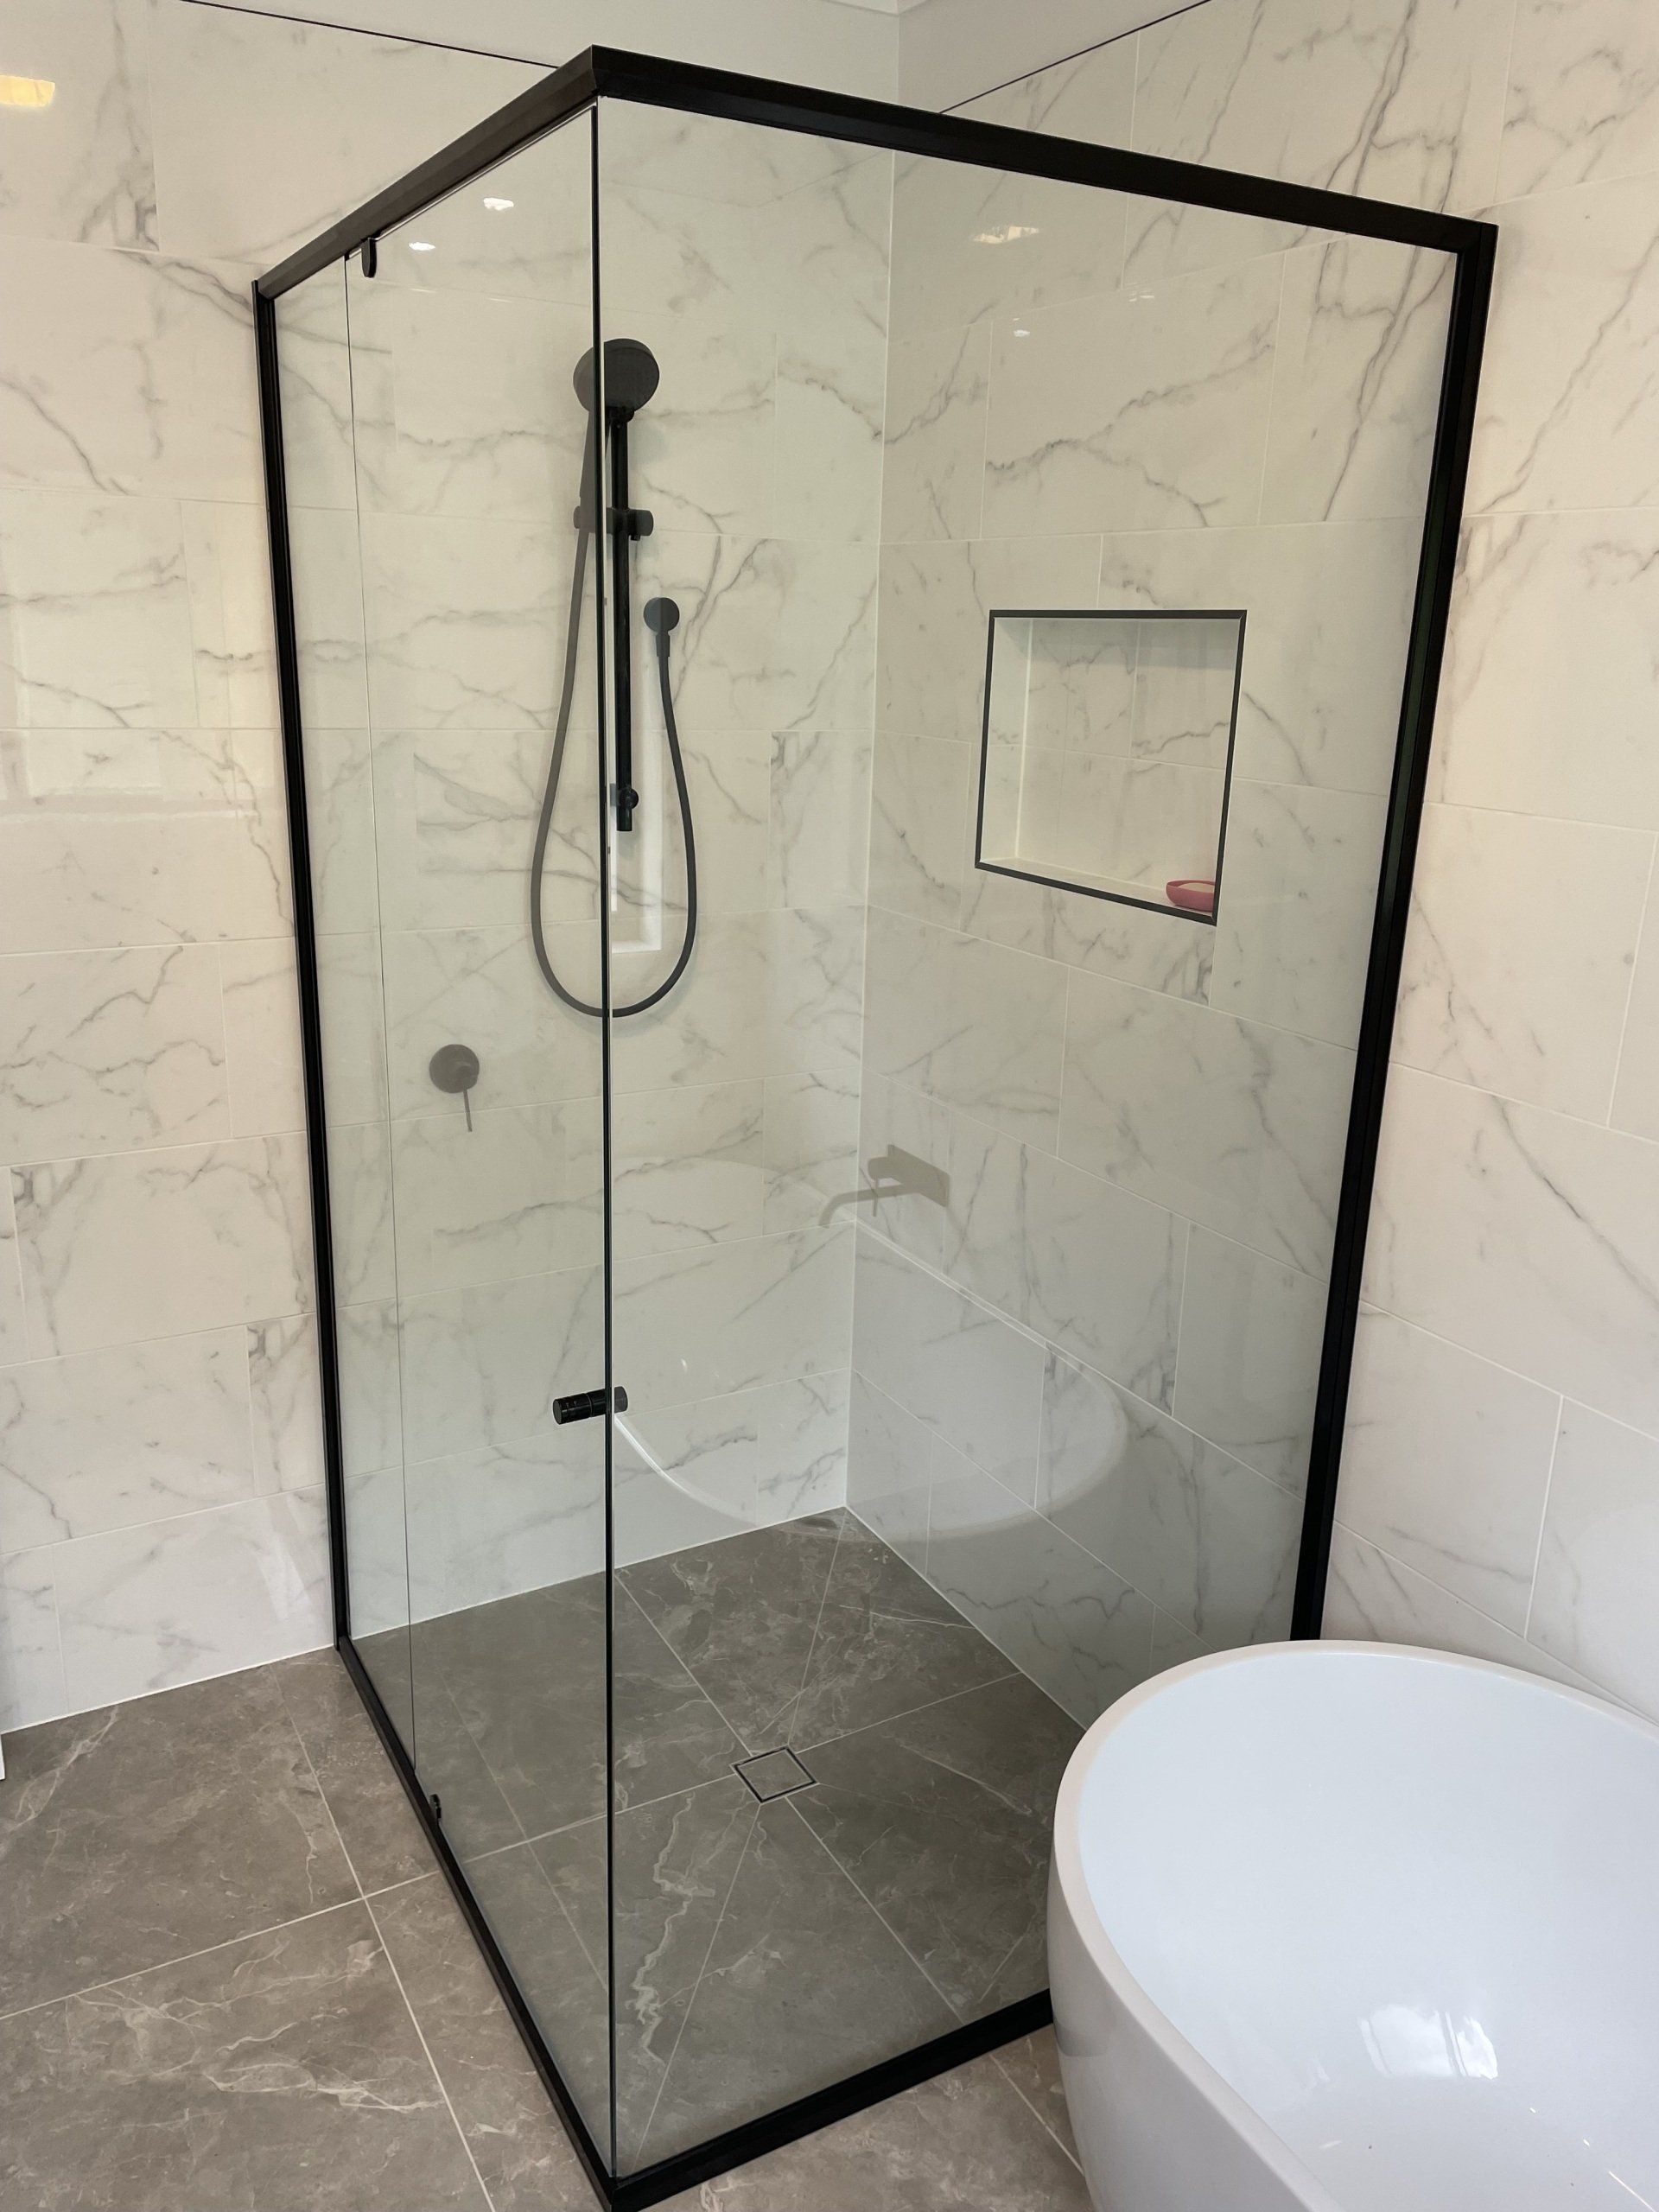 E3 Frameless Shower screen — Window Glass Repair and Installation in Coffs Harbour, NSW